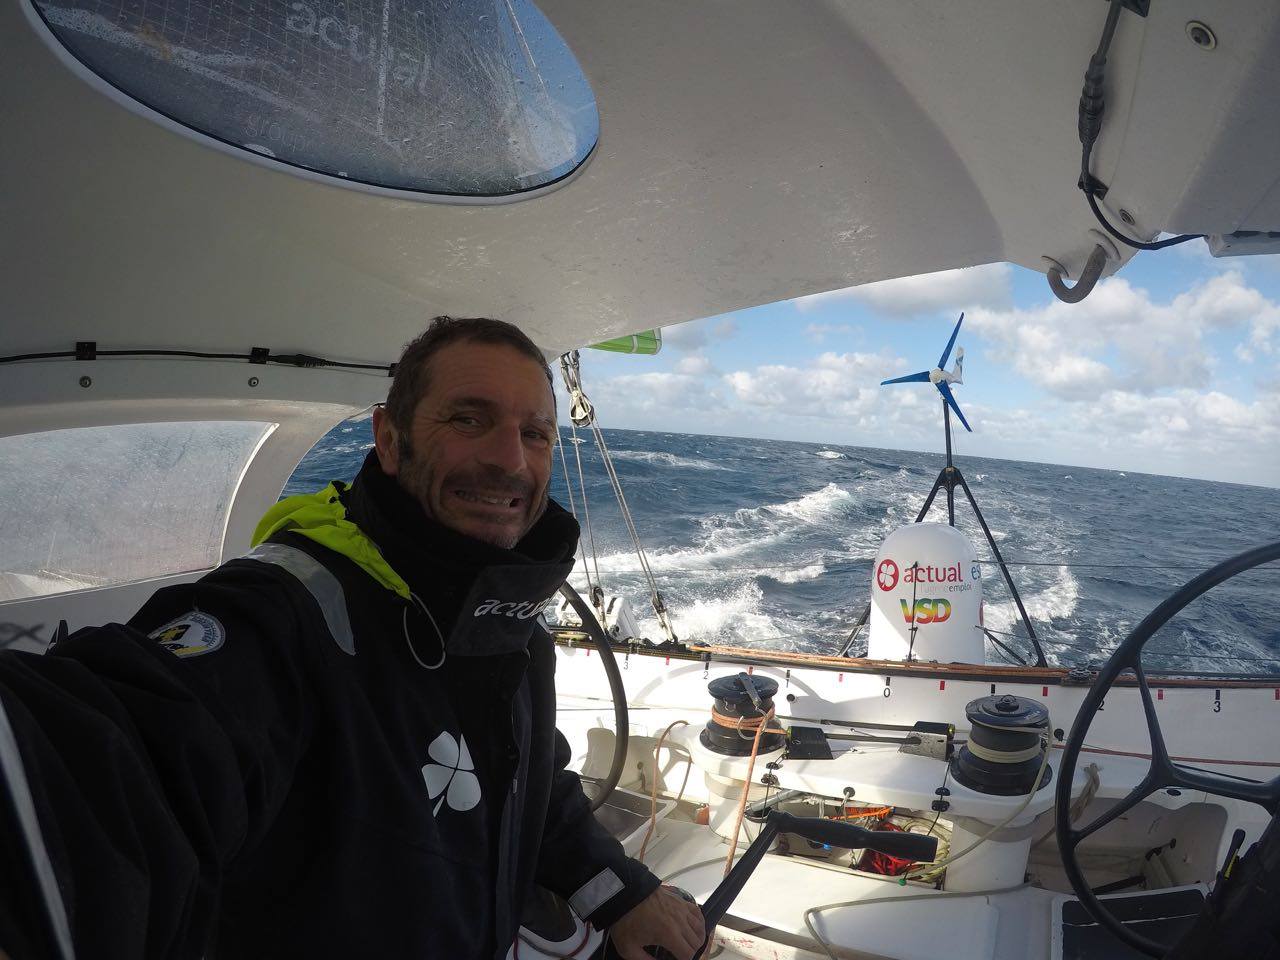  Solo Around the World Record from East to West  Yves Le Blevec FRA  Day 18